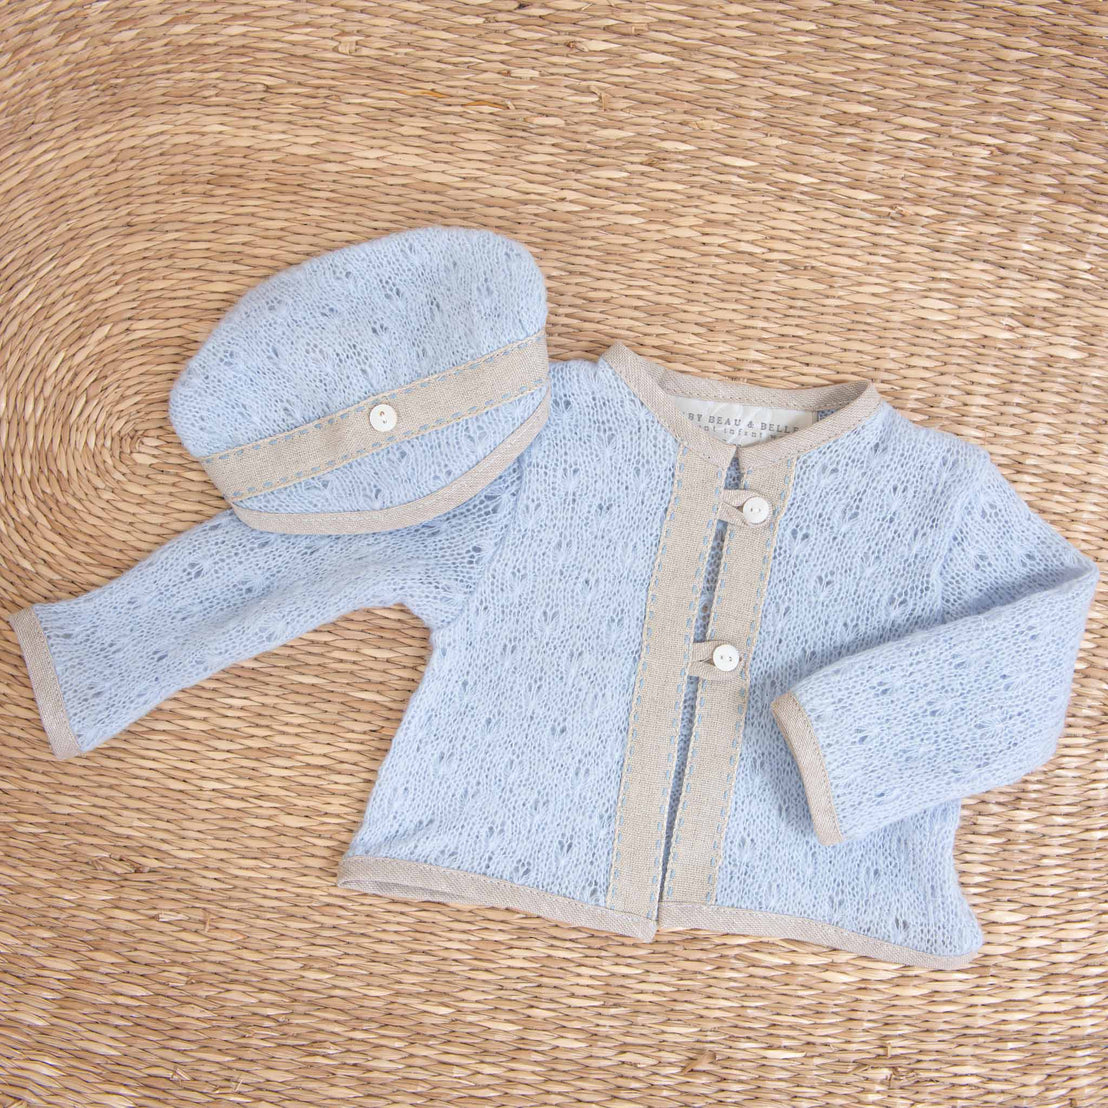 A light blue knitted Austin Newborn Knit Sweater and matching cap laid flat on a woven straw background, perfect for a coming home outfit.